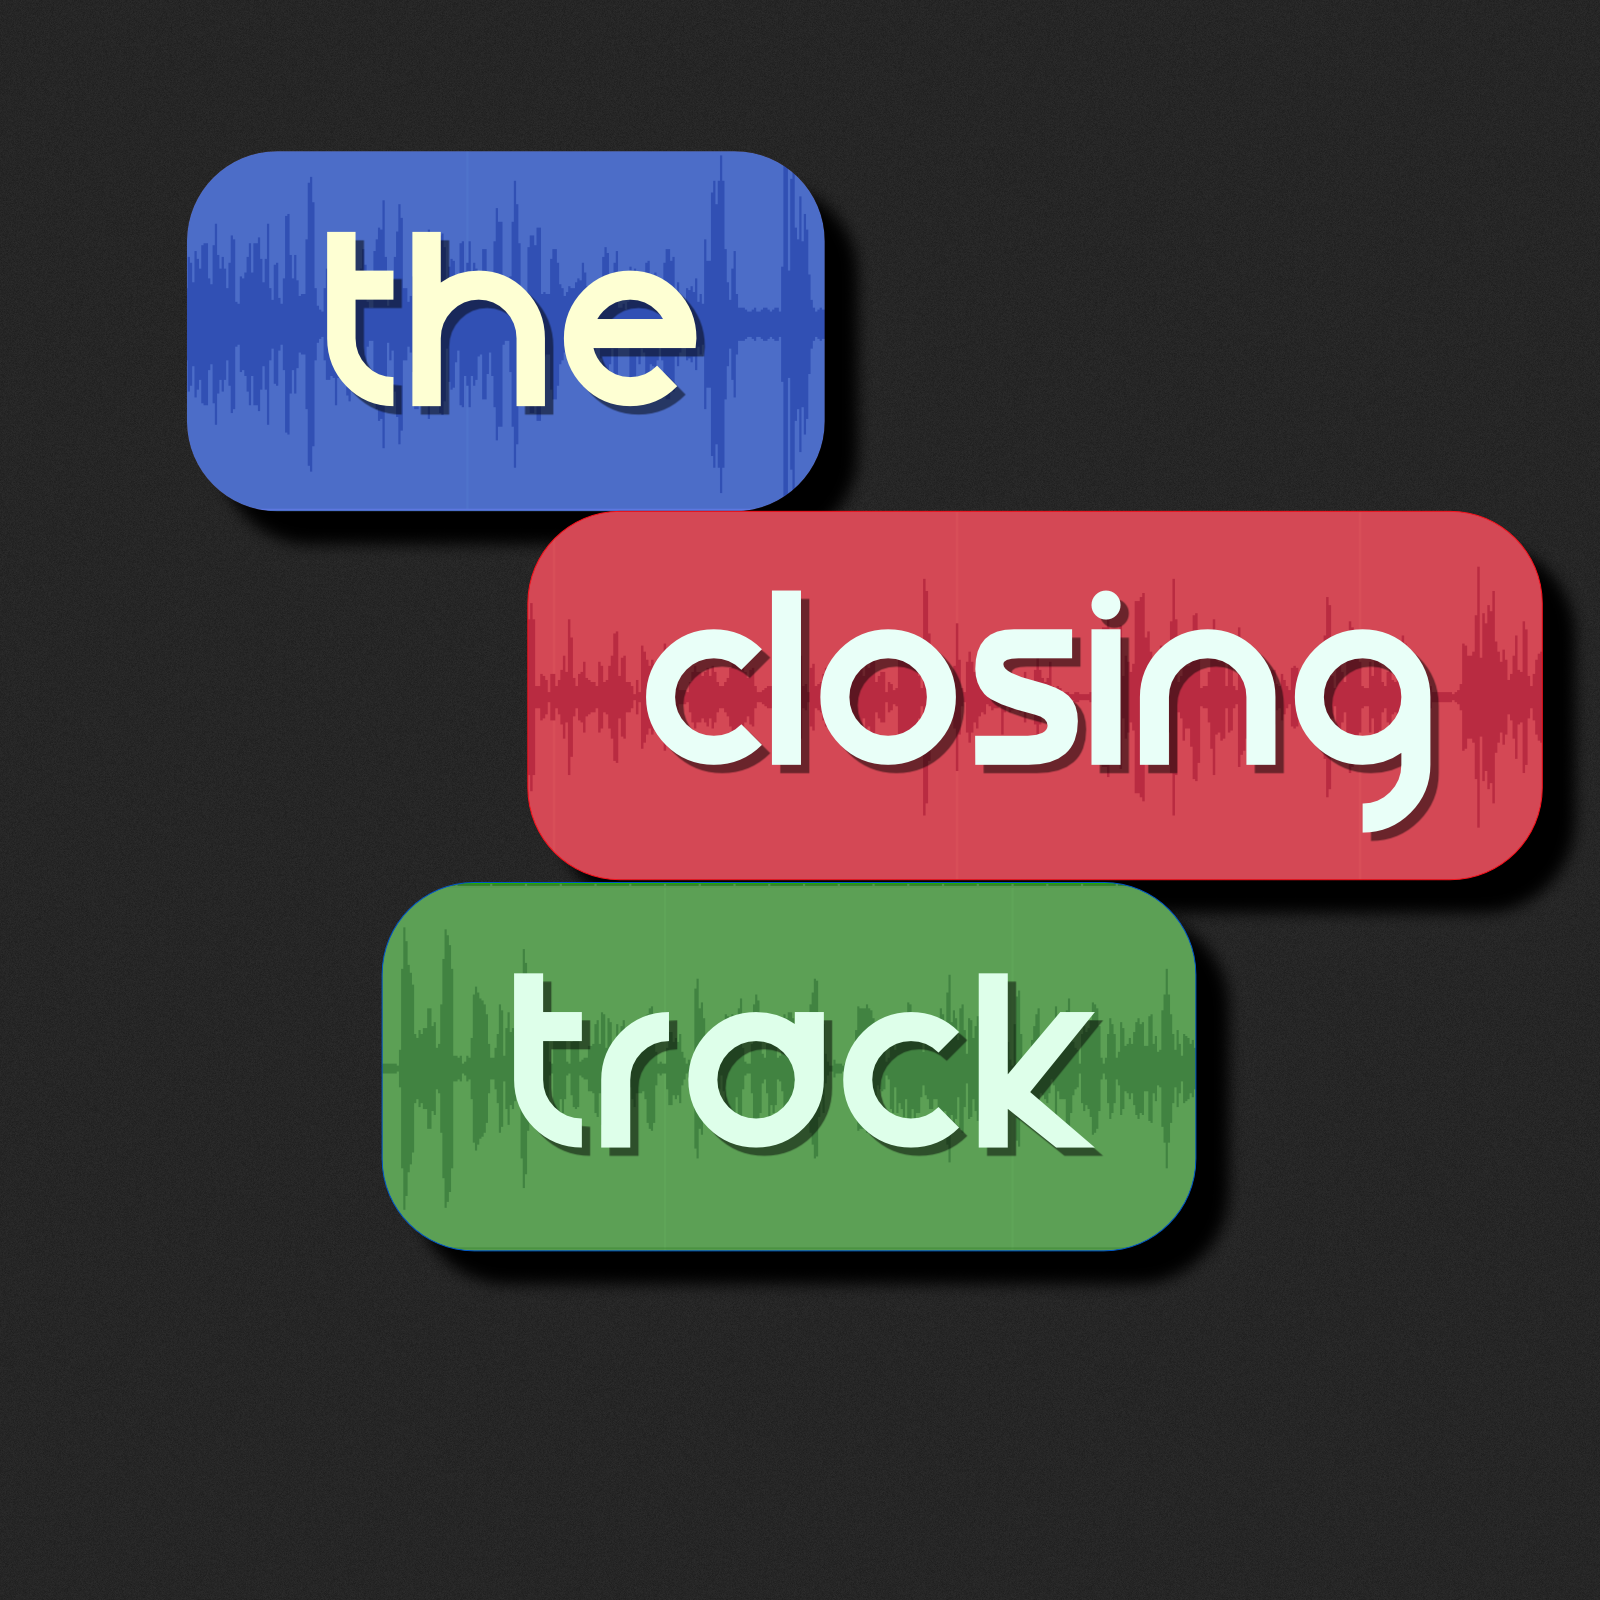 Subscribe to Austin's podcast "The Closing Track" in iTunes!